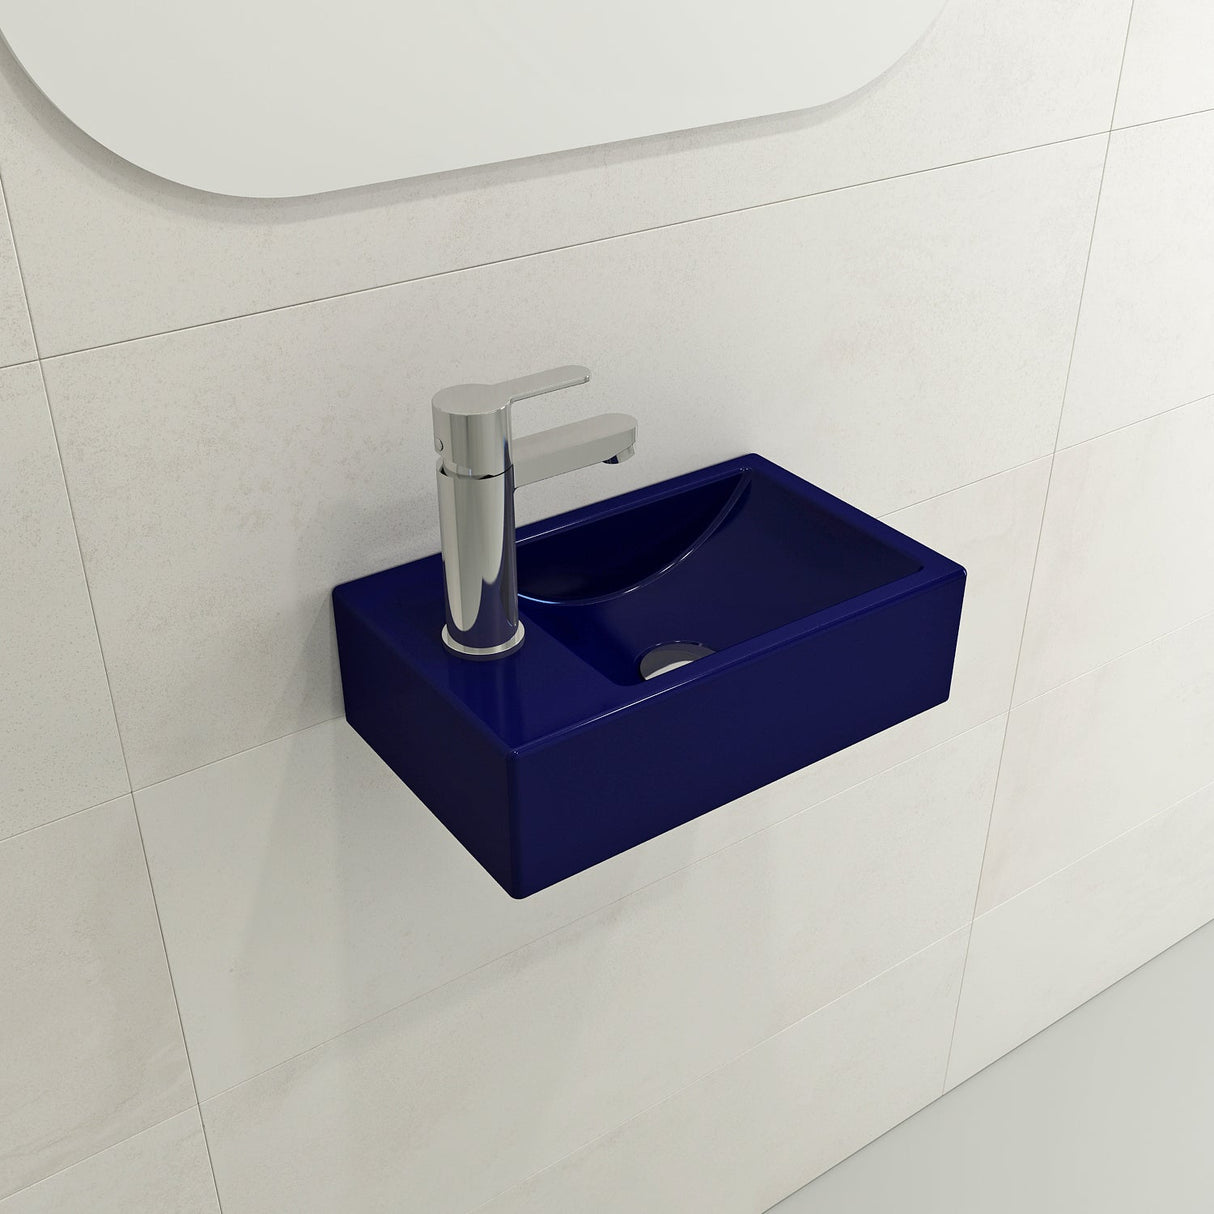 BOCCHI 1418-010-0126 Milano Wall-Mounted Sink Fireclay 14.5 in. 1-hole Left Side Faucet Deck in Sapphire Blue